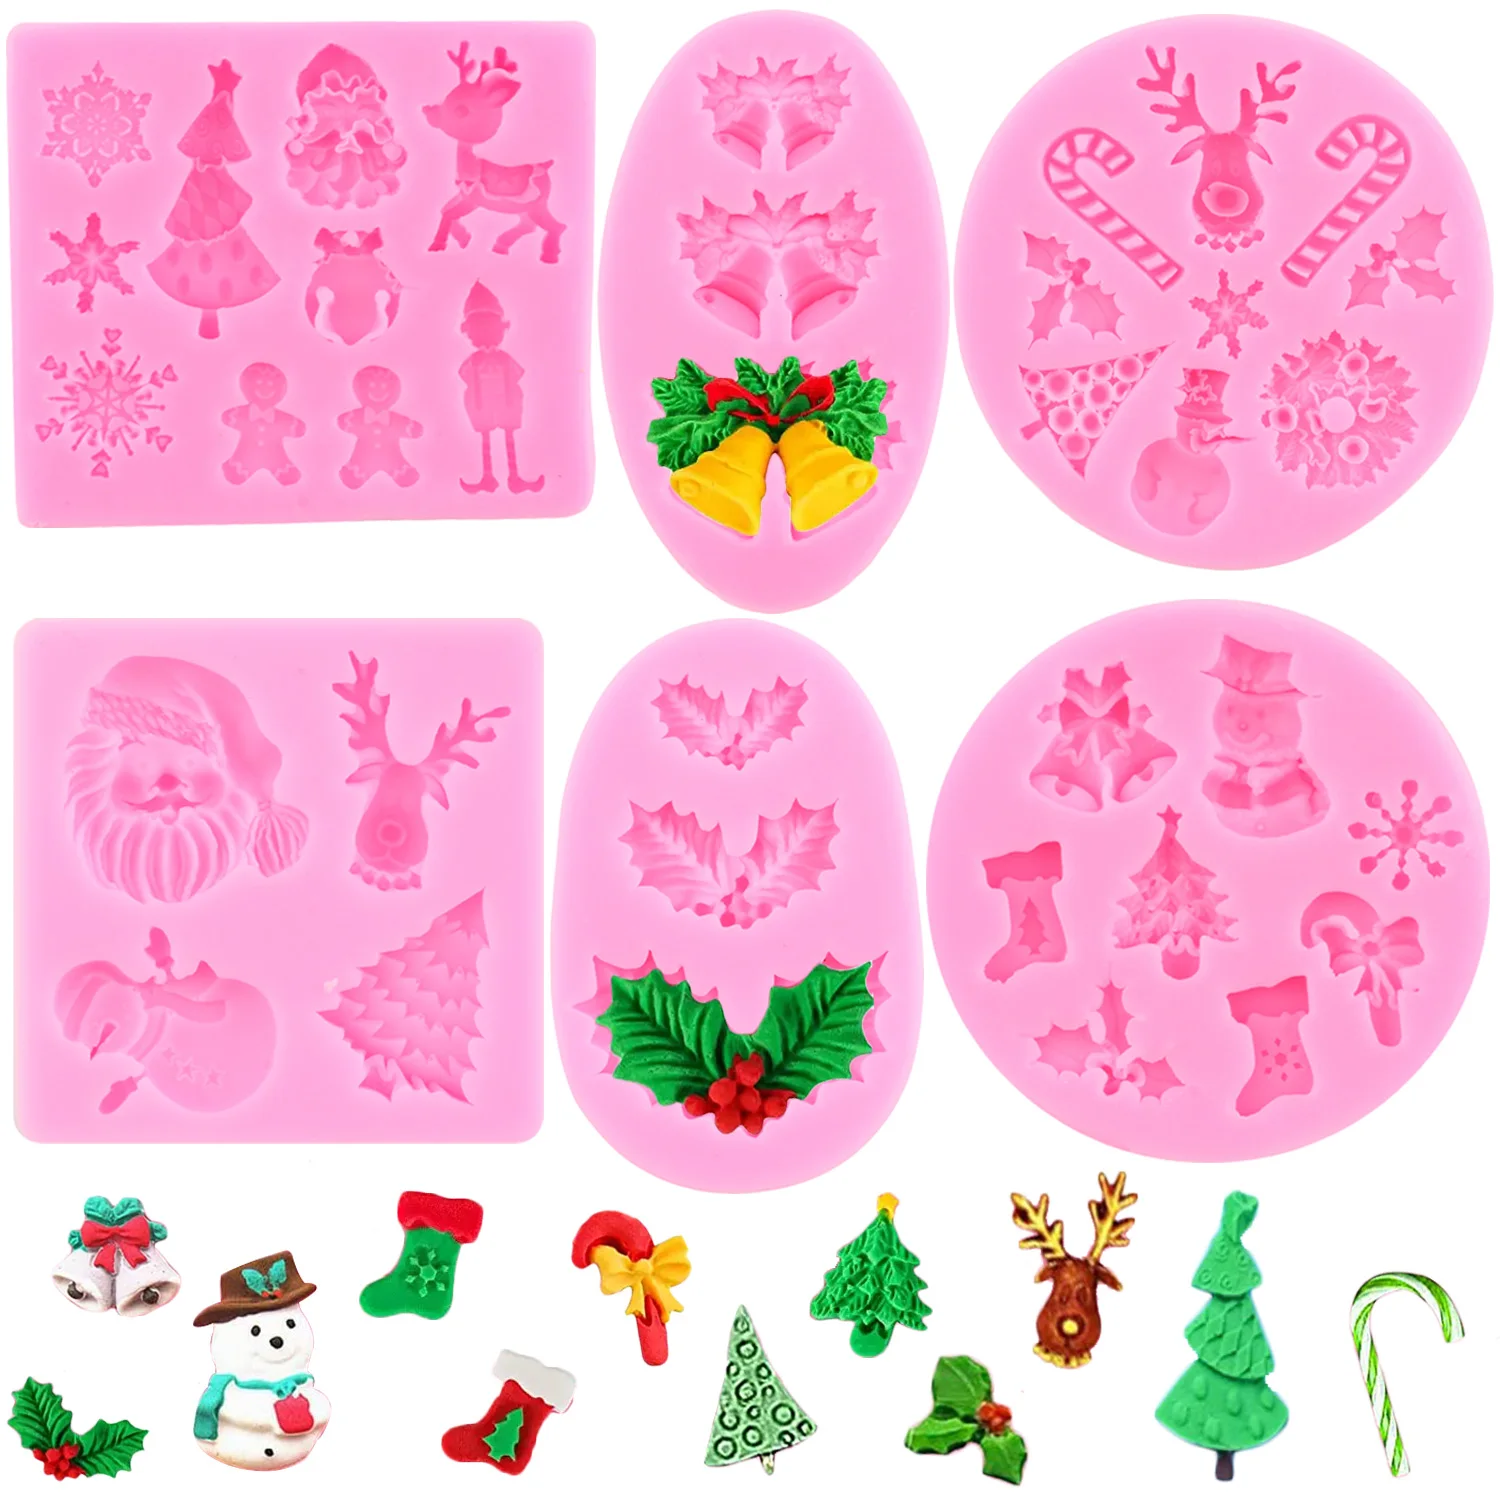 

3D Christmas Bell Silicone Mold Holly Leaf Fondant Molds Cake Decorating Tools Santa Claus Chocolate Candy Resin Clay Moulds